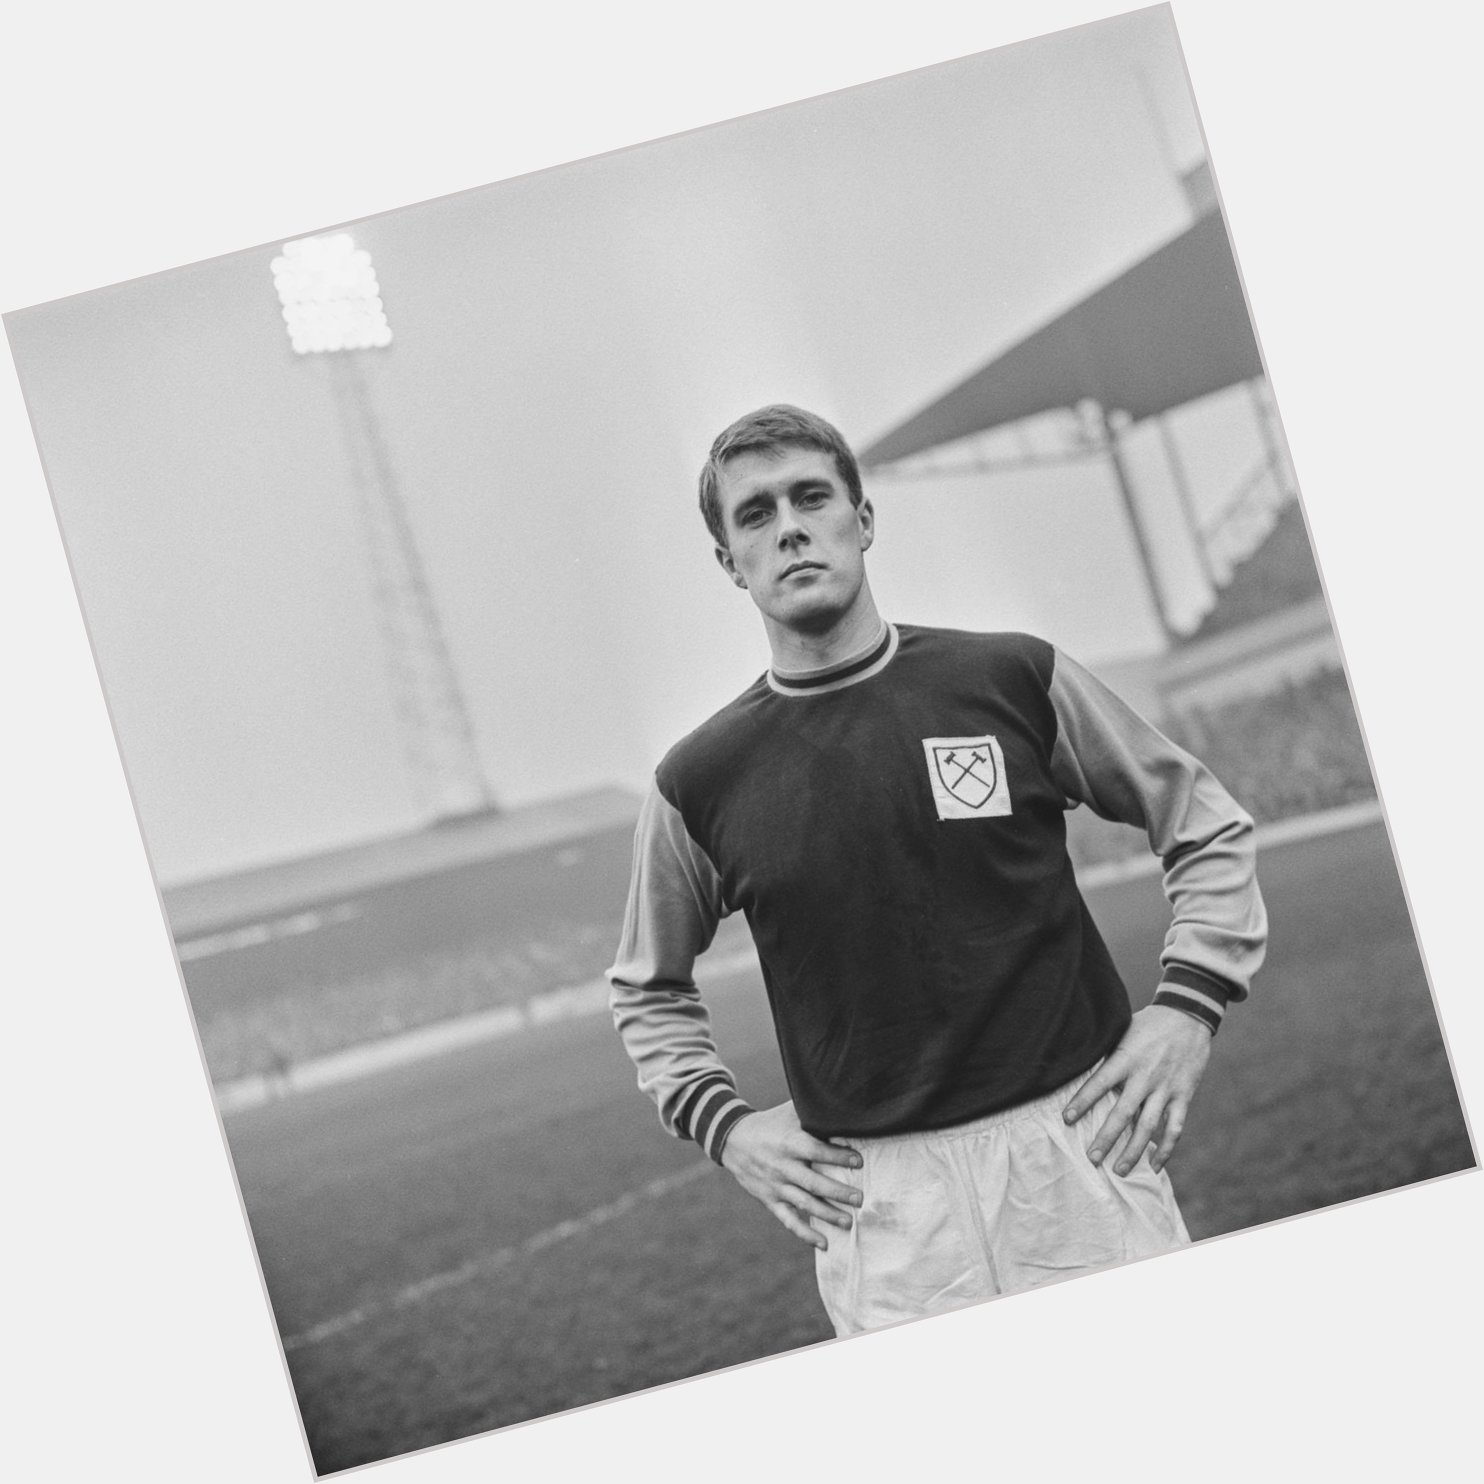 Happy birthday to this legend. Sir Geoff Hurst is 81 today! 